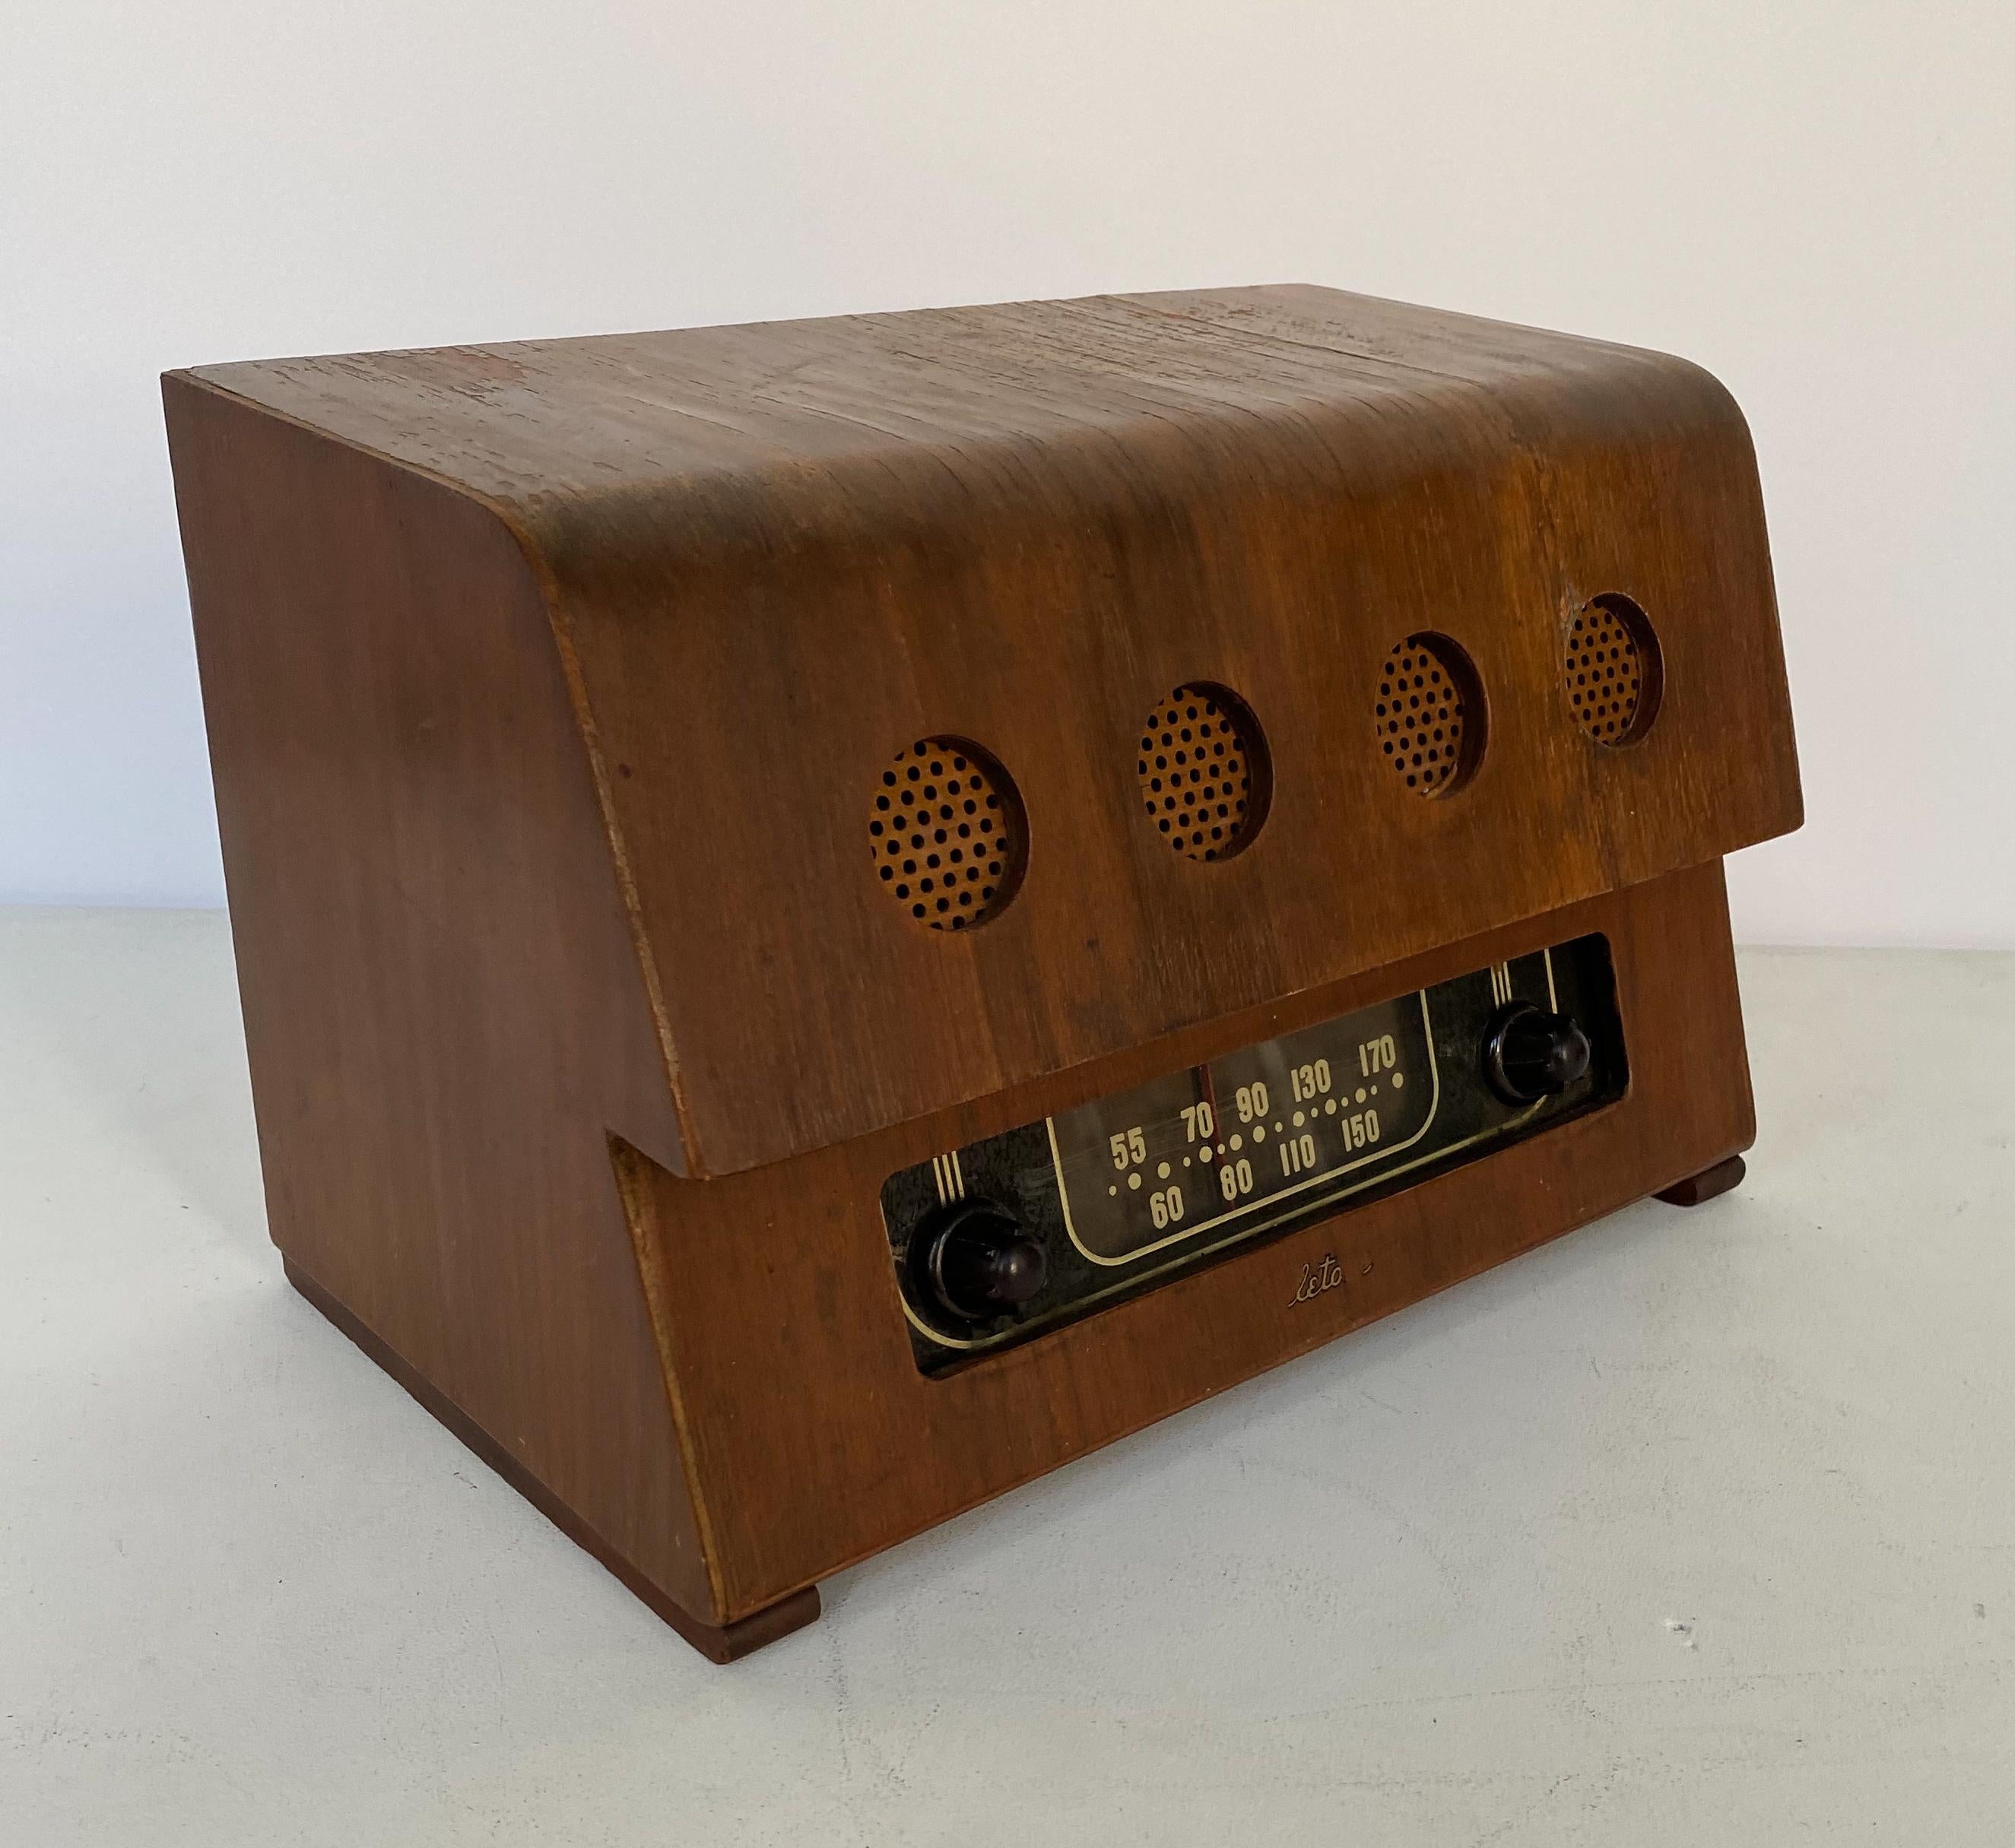 Radio of molded and cut walnut plywood, bakelite, glass and perforated masonite. Designed by Charles and Ray Eames and produced by Evans Products for Teletone, circa 1946. As Richard Wright noted in 2004, 